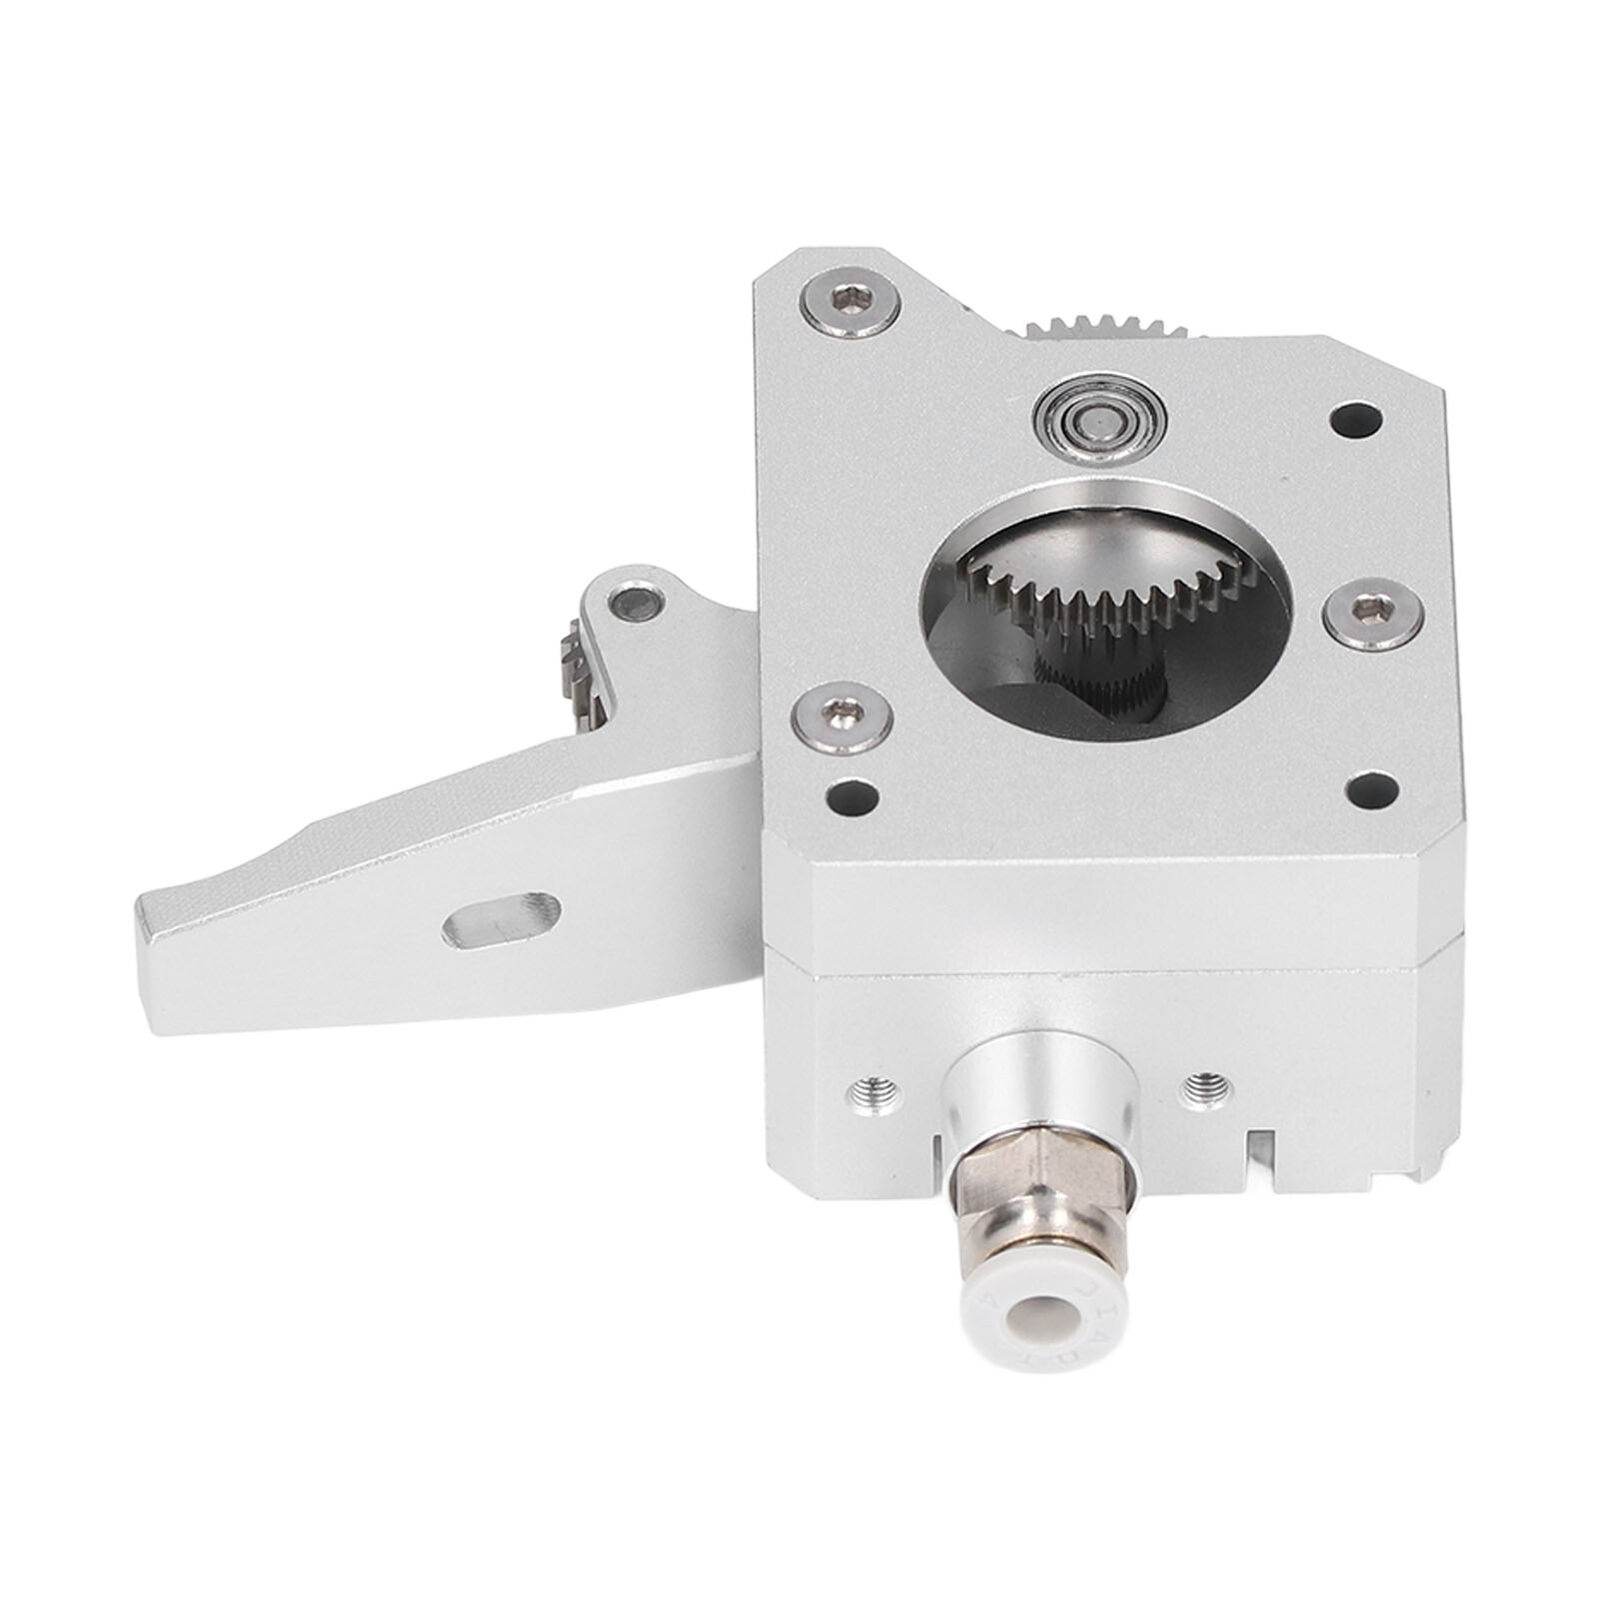 Dual Gear Extruder Metal Silver MK8 For Prusa I3 Mk3 Right Handed